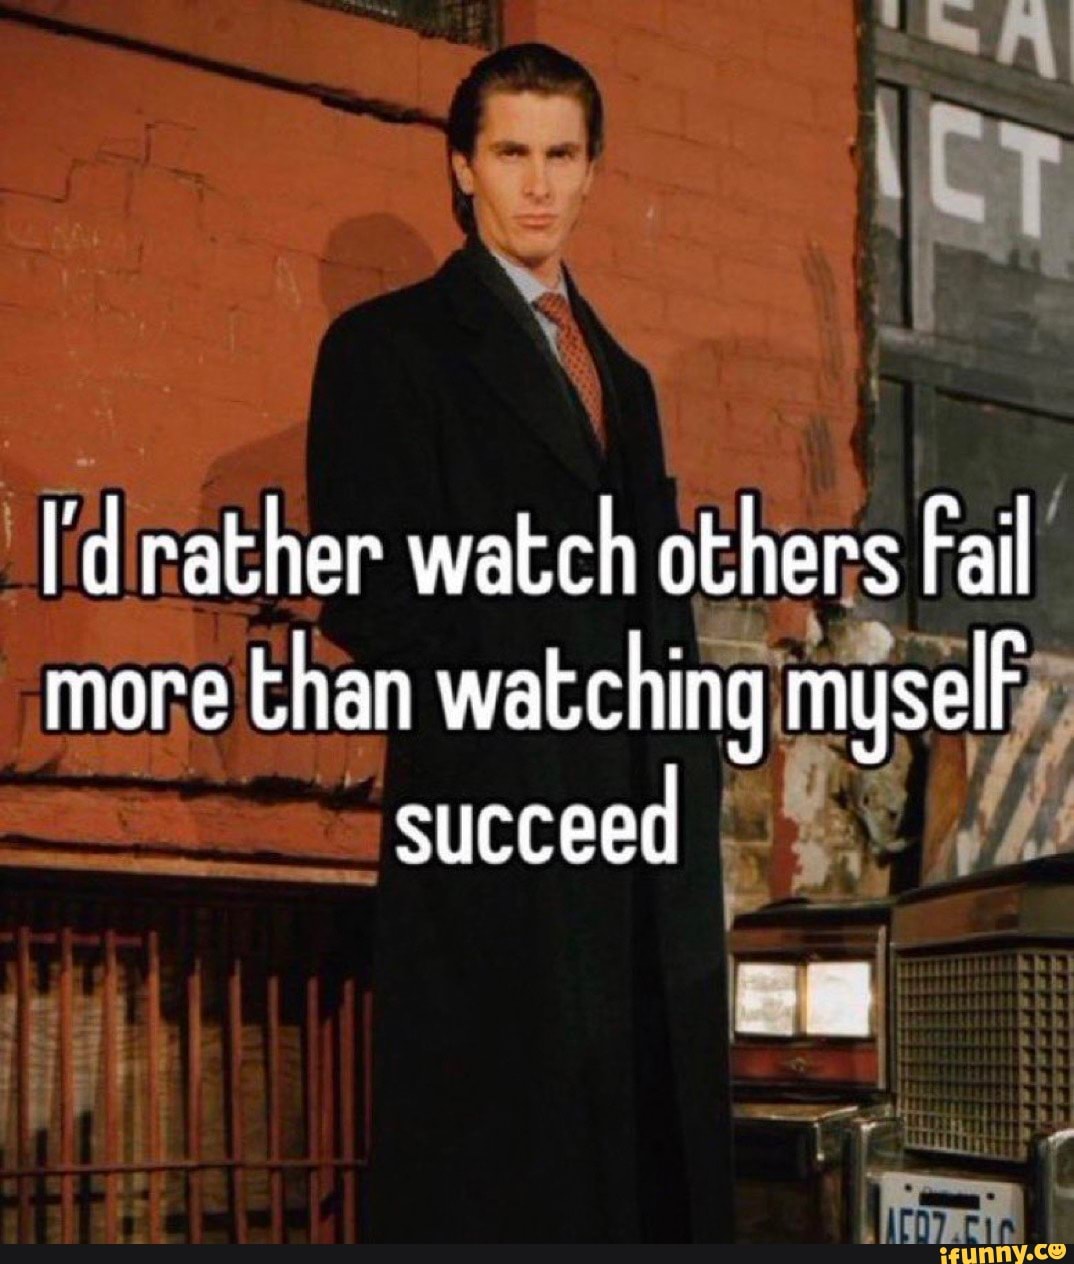 Watch myself. Others fail suceed.